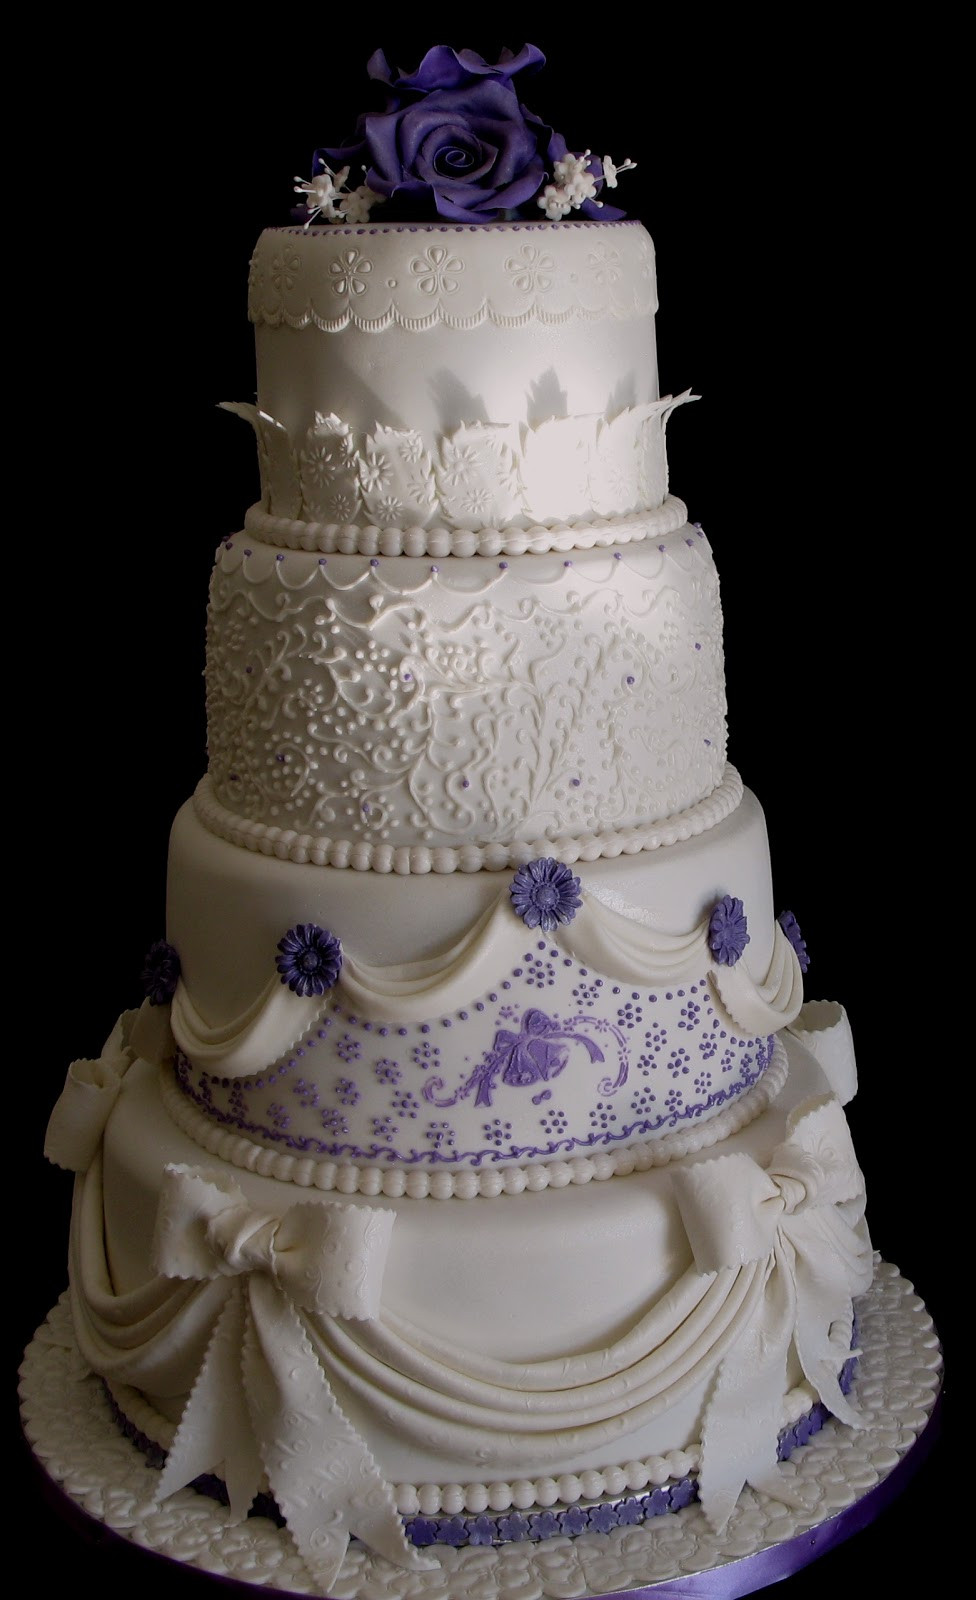 4 Layered Wedding Cakes
 Sugarcraft by Soni Four Layer Wedding Cake Drapes and